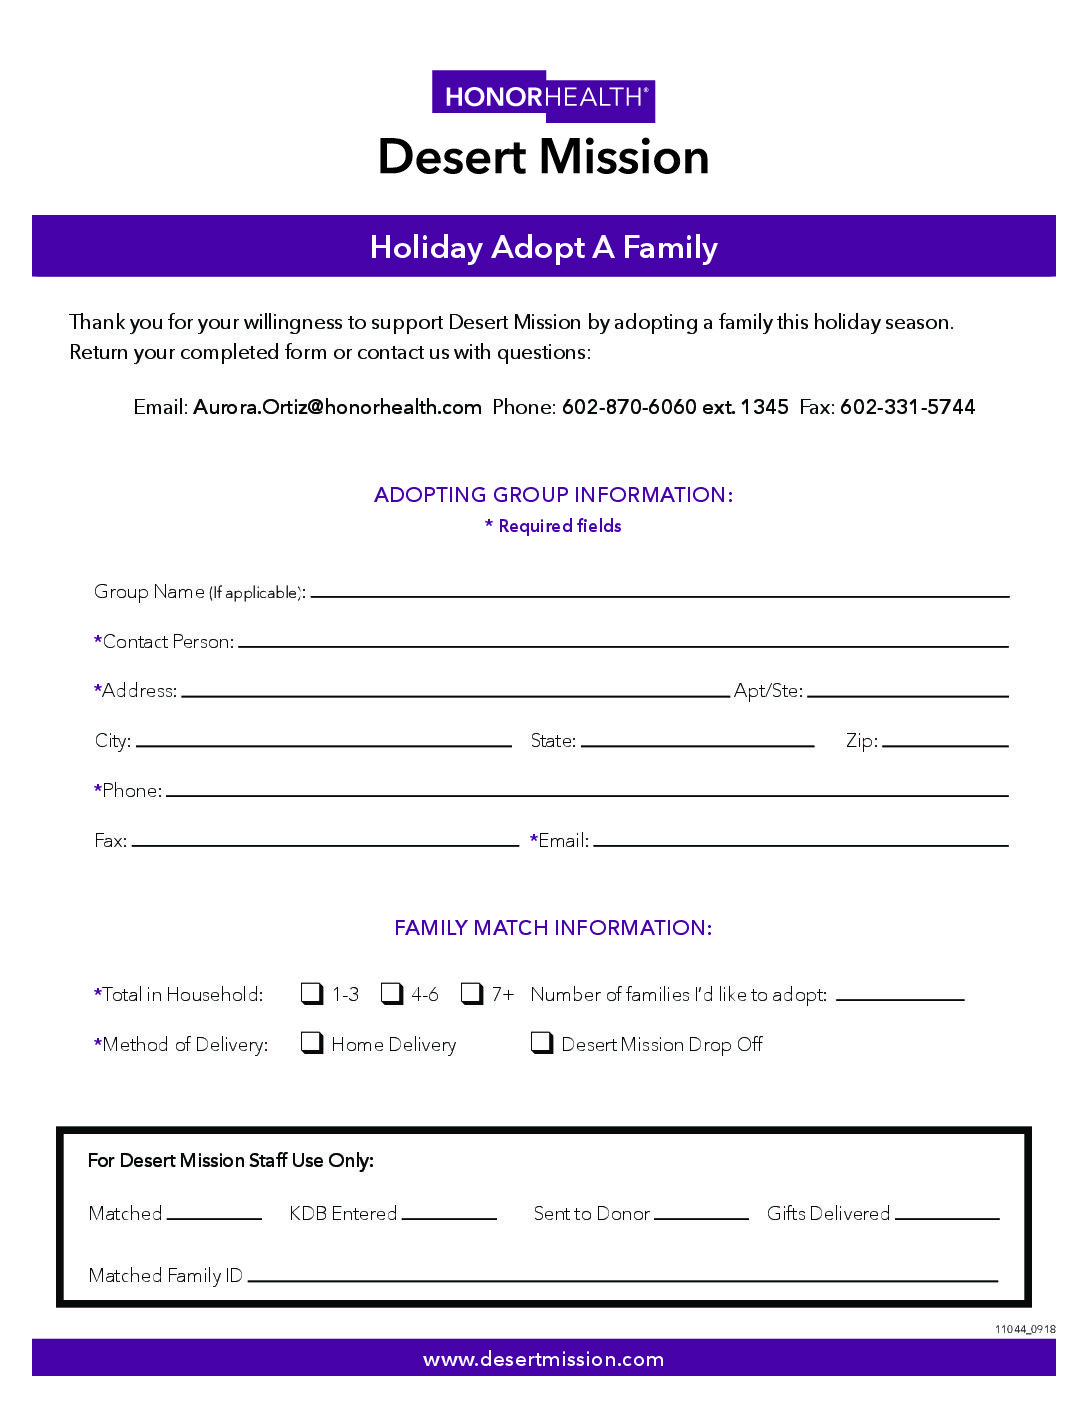 holiday-adopt-a-family-form-honorhealth-desert-mission